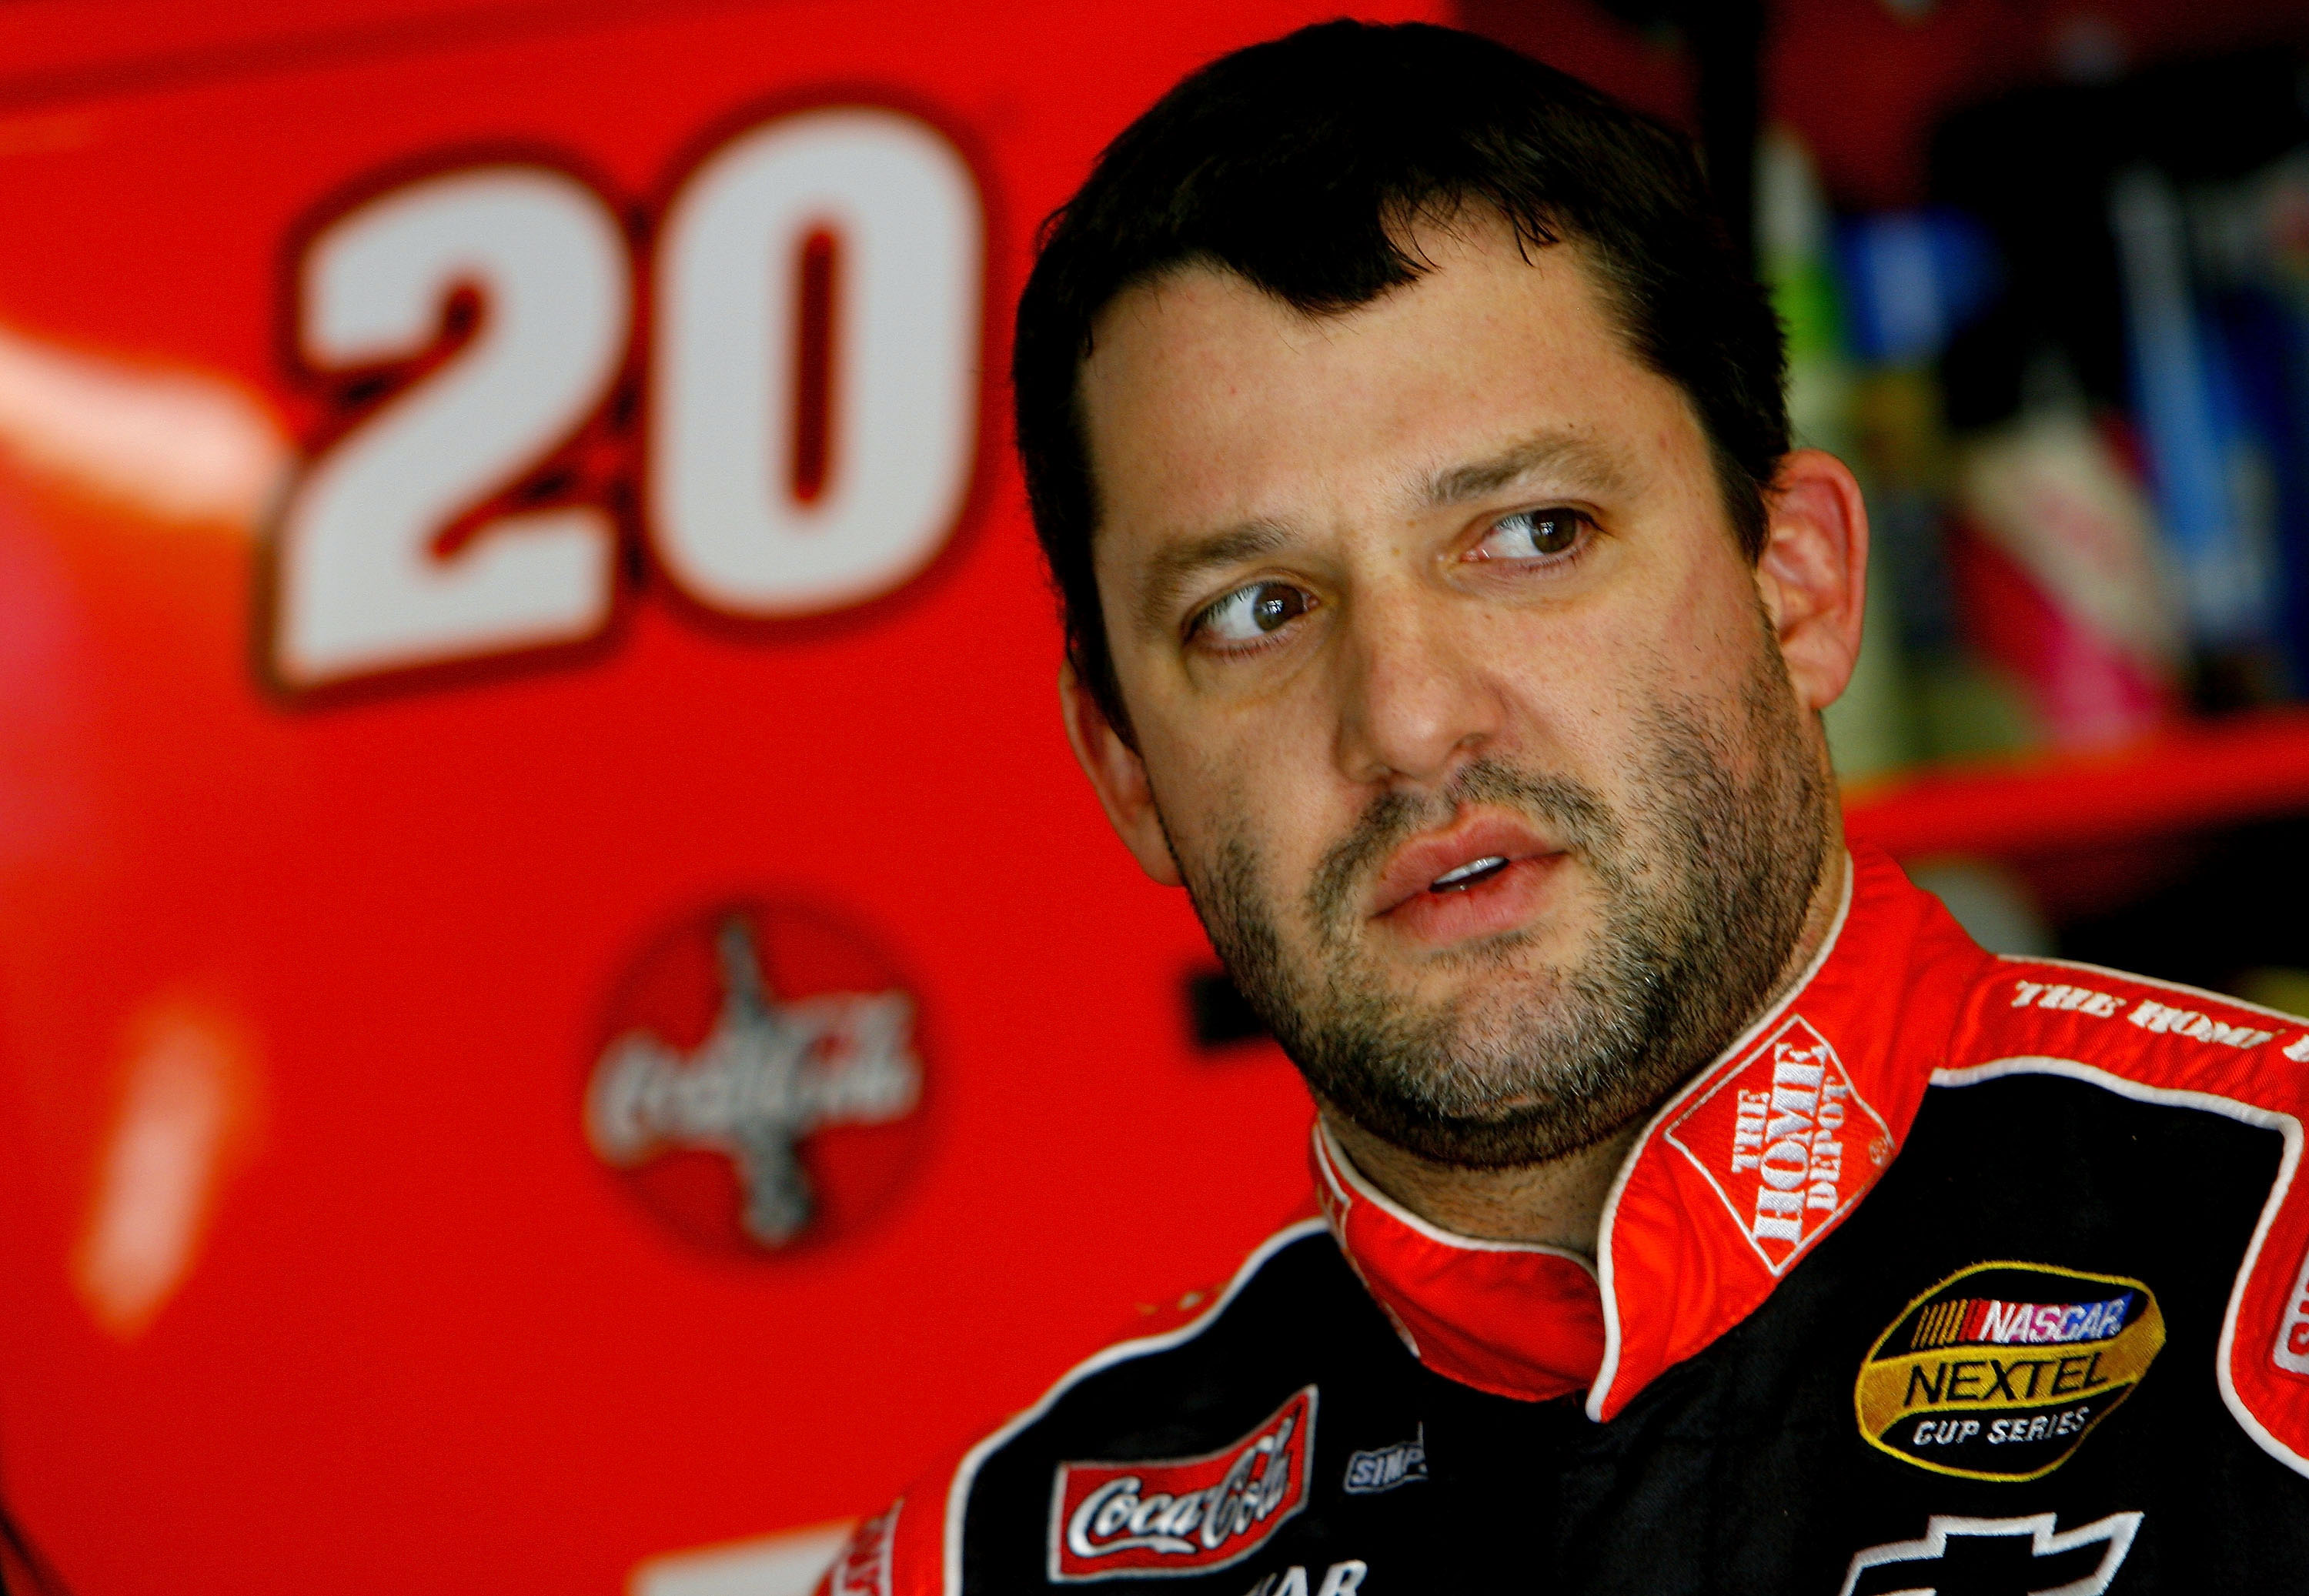 LAS VEGAS - JANUARY 29: Tony Stewart, driver of the #20 Home Depot Chevrolet, in the garage during NASCAR testing at Las Vegas Motor Speedway January 29, 2007 in Las Vegas, Nevada. (Photo by Rusty Jarrett/Getty Images for NASCAR) | Getty Images